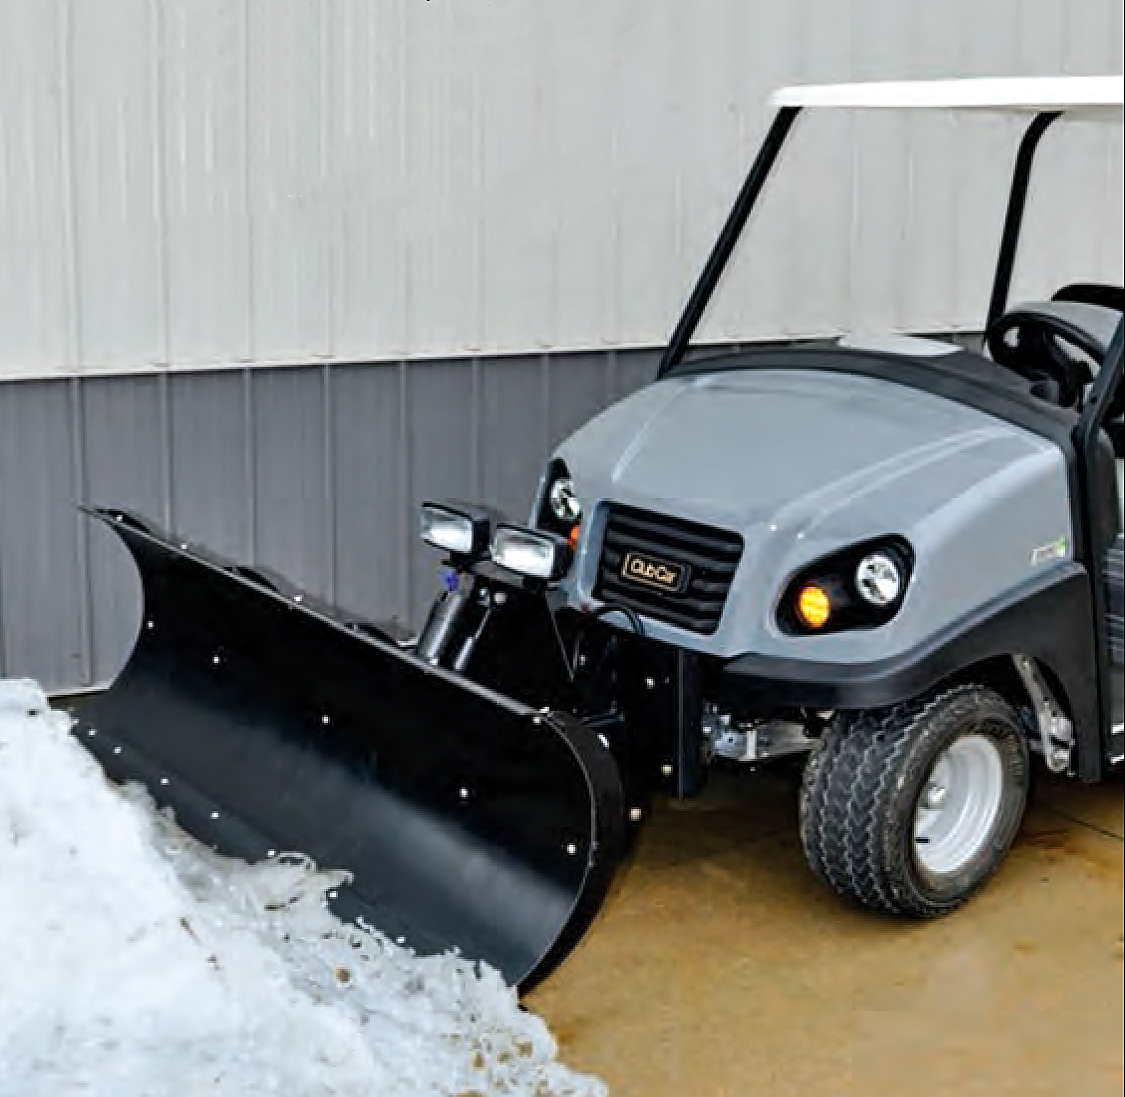 A snowplow for your golf cart